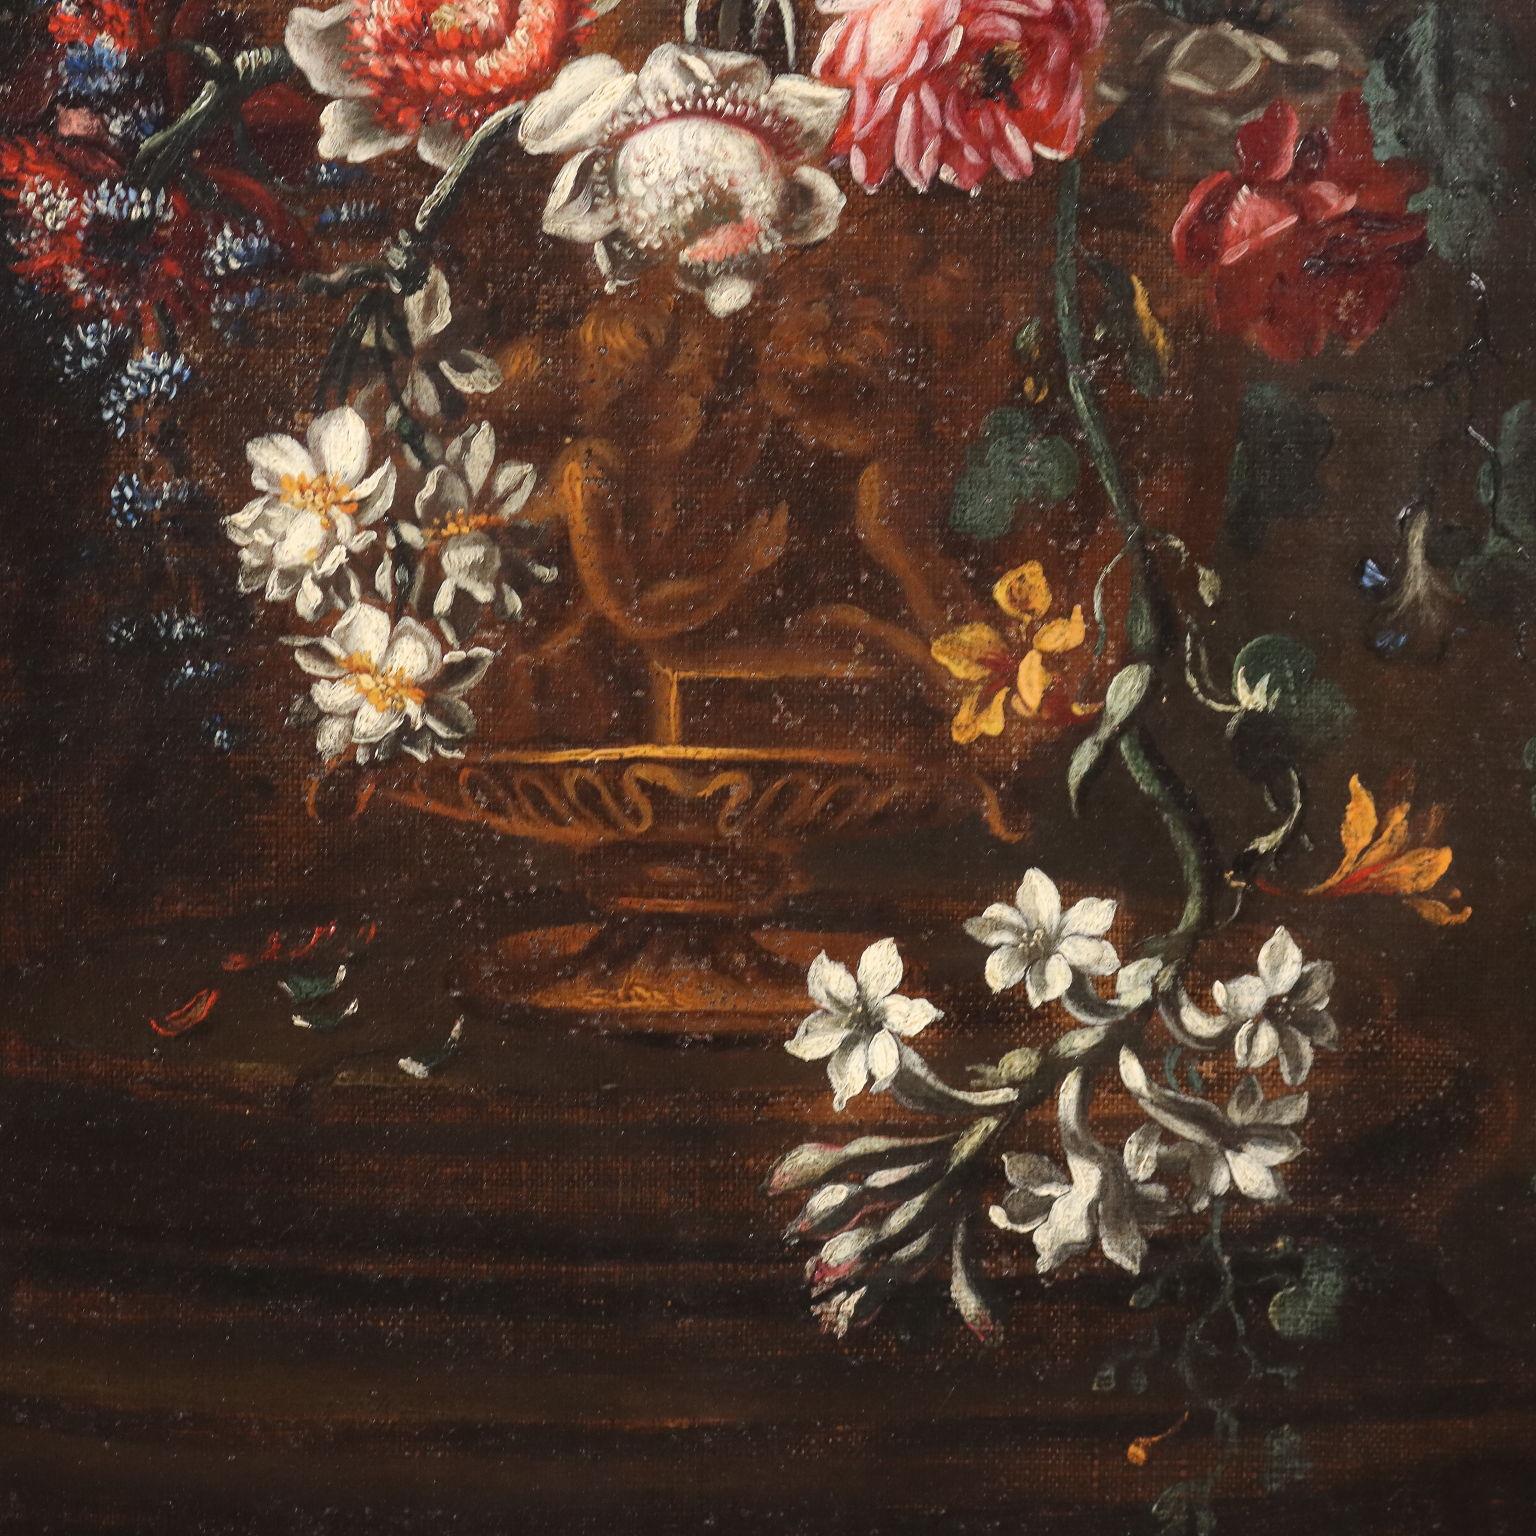 Still Life with Flowers, Fruit and Pumpkins, XVIIth - XVIIIth century - Black Still-Life Painting by Unknown